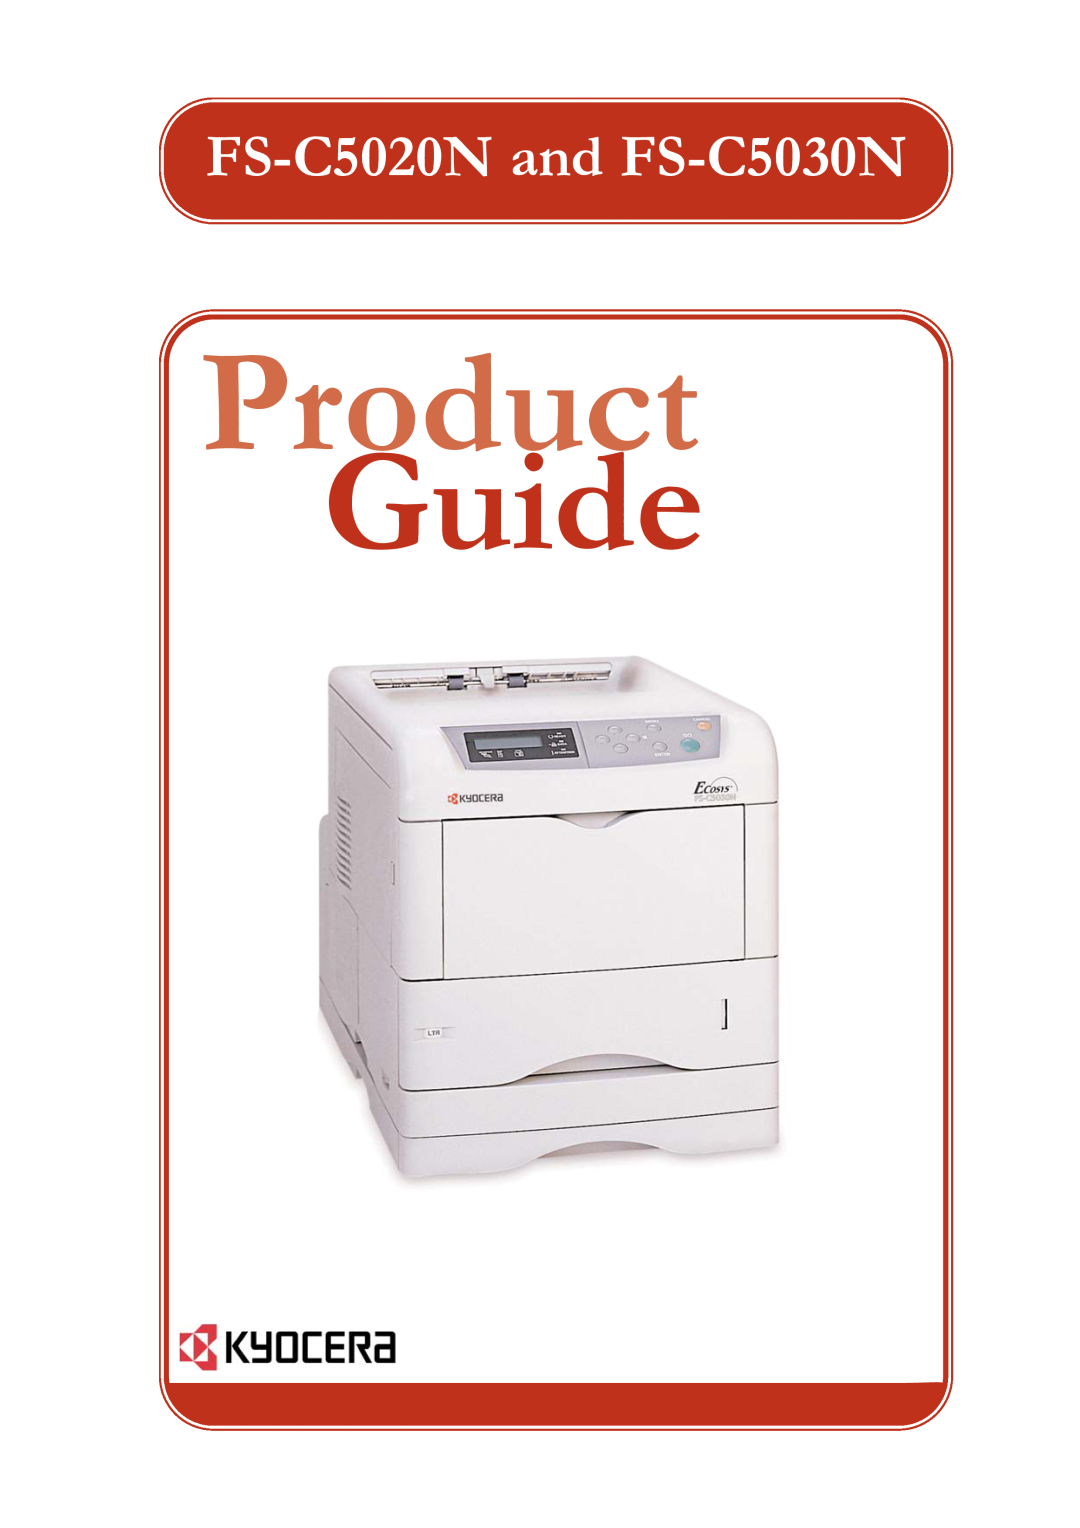 Kyocera manual Product, Guide, FS-C5020N and FS-C5030N 